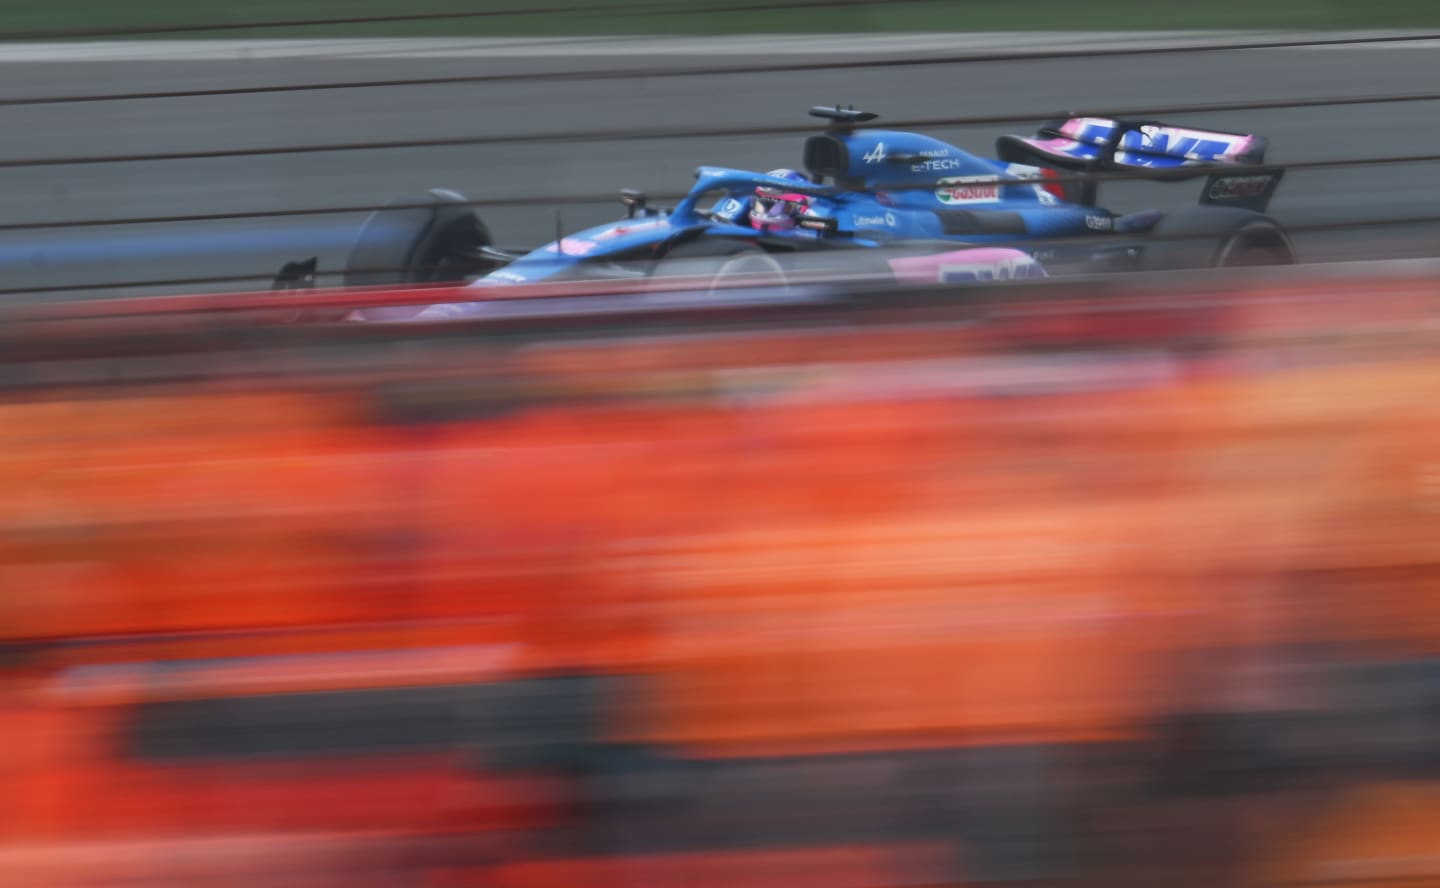 ZANDVOORT, NETHERLANDS - SEPTEMBER 04: Fernando Alonso of Spain driving the (14) Alpine F1 A522 Renault on track during the F1 Grand Prix of The Netherlands at Circuit Zandvoort on September 04, 2022 in Zandvoort, Netherlands. (Photo by Clive Mason/Getty Images)